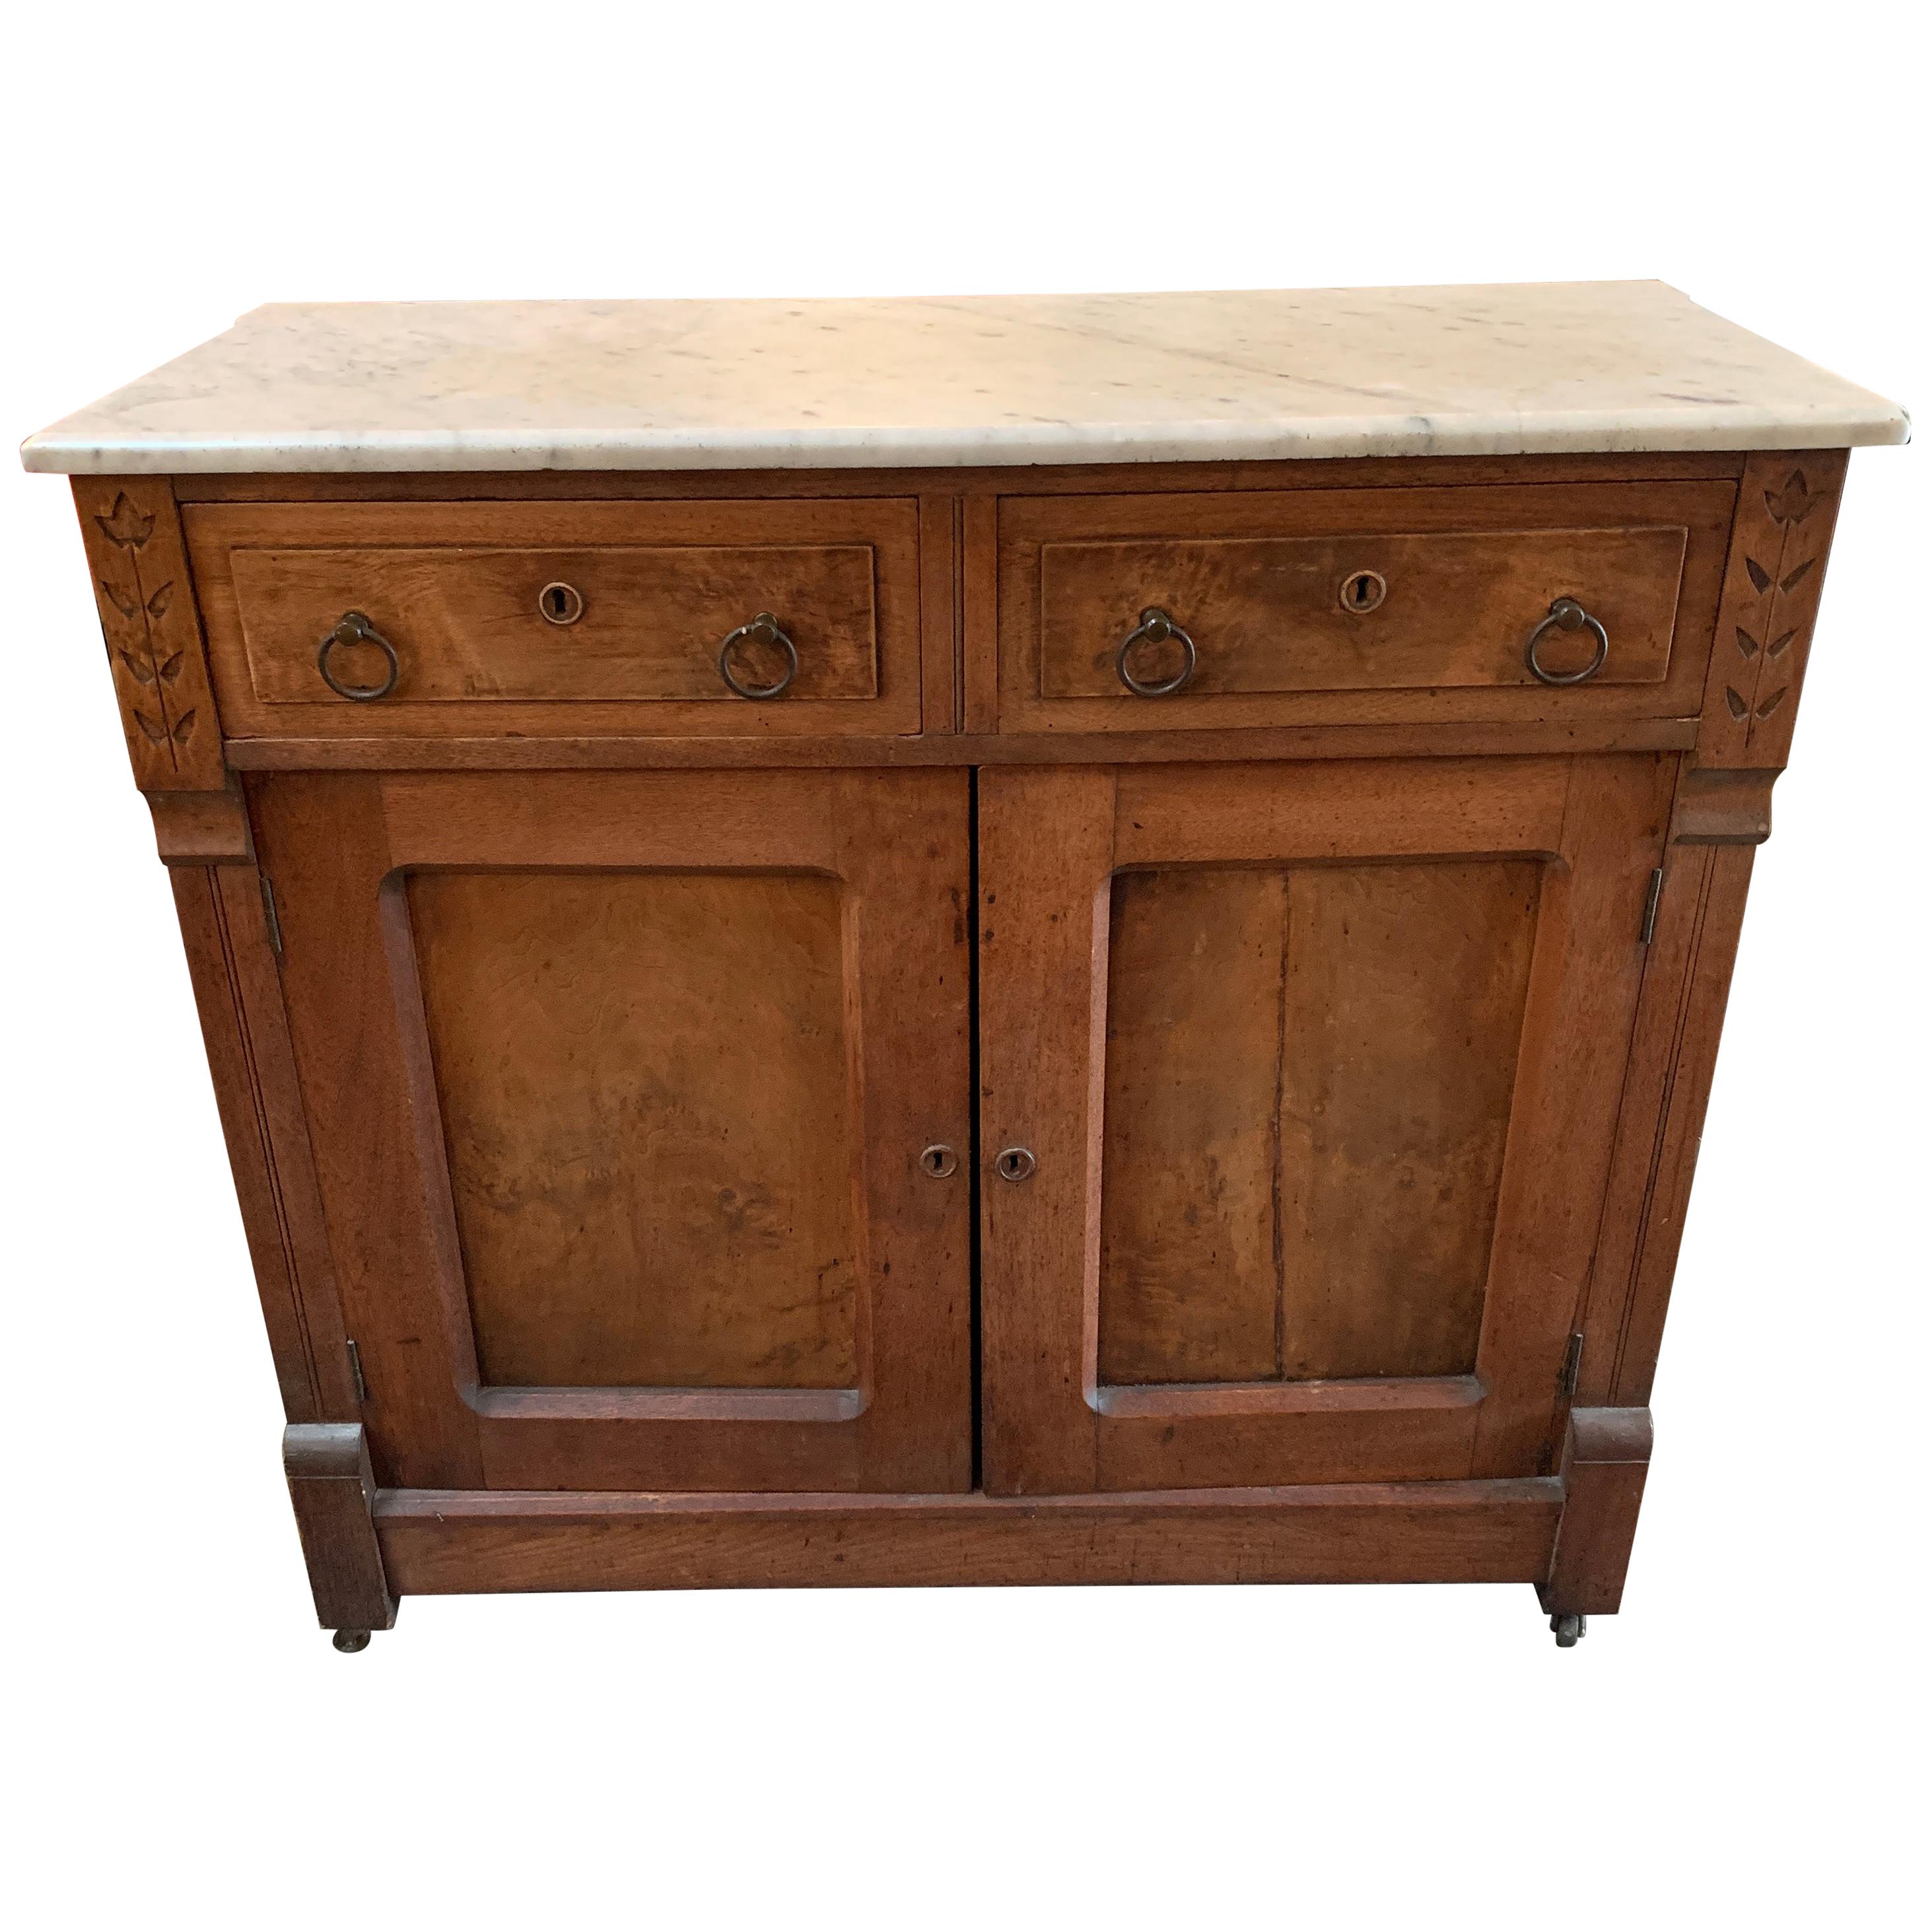 Victorian Walnut Sideboard with Marble Top from Phillips Mansion, Pomona